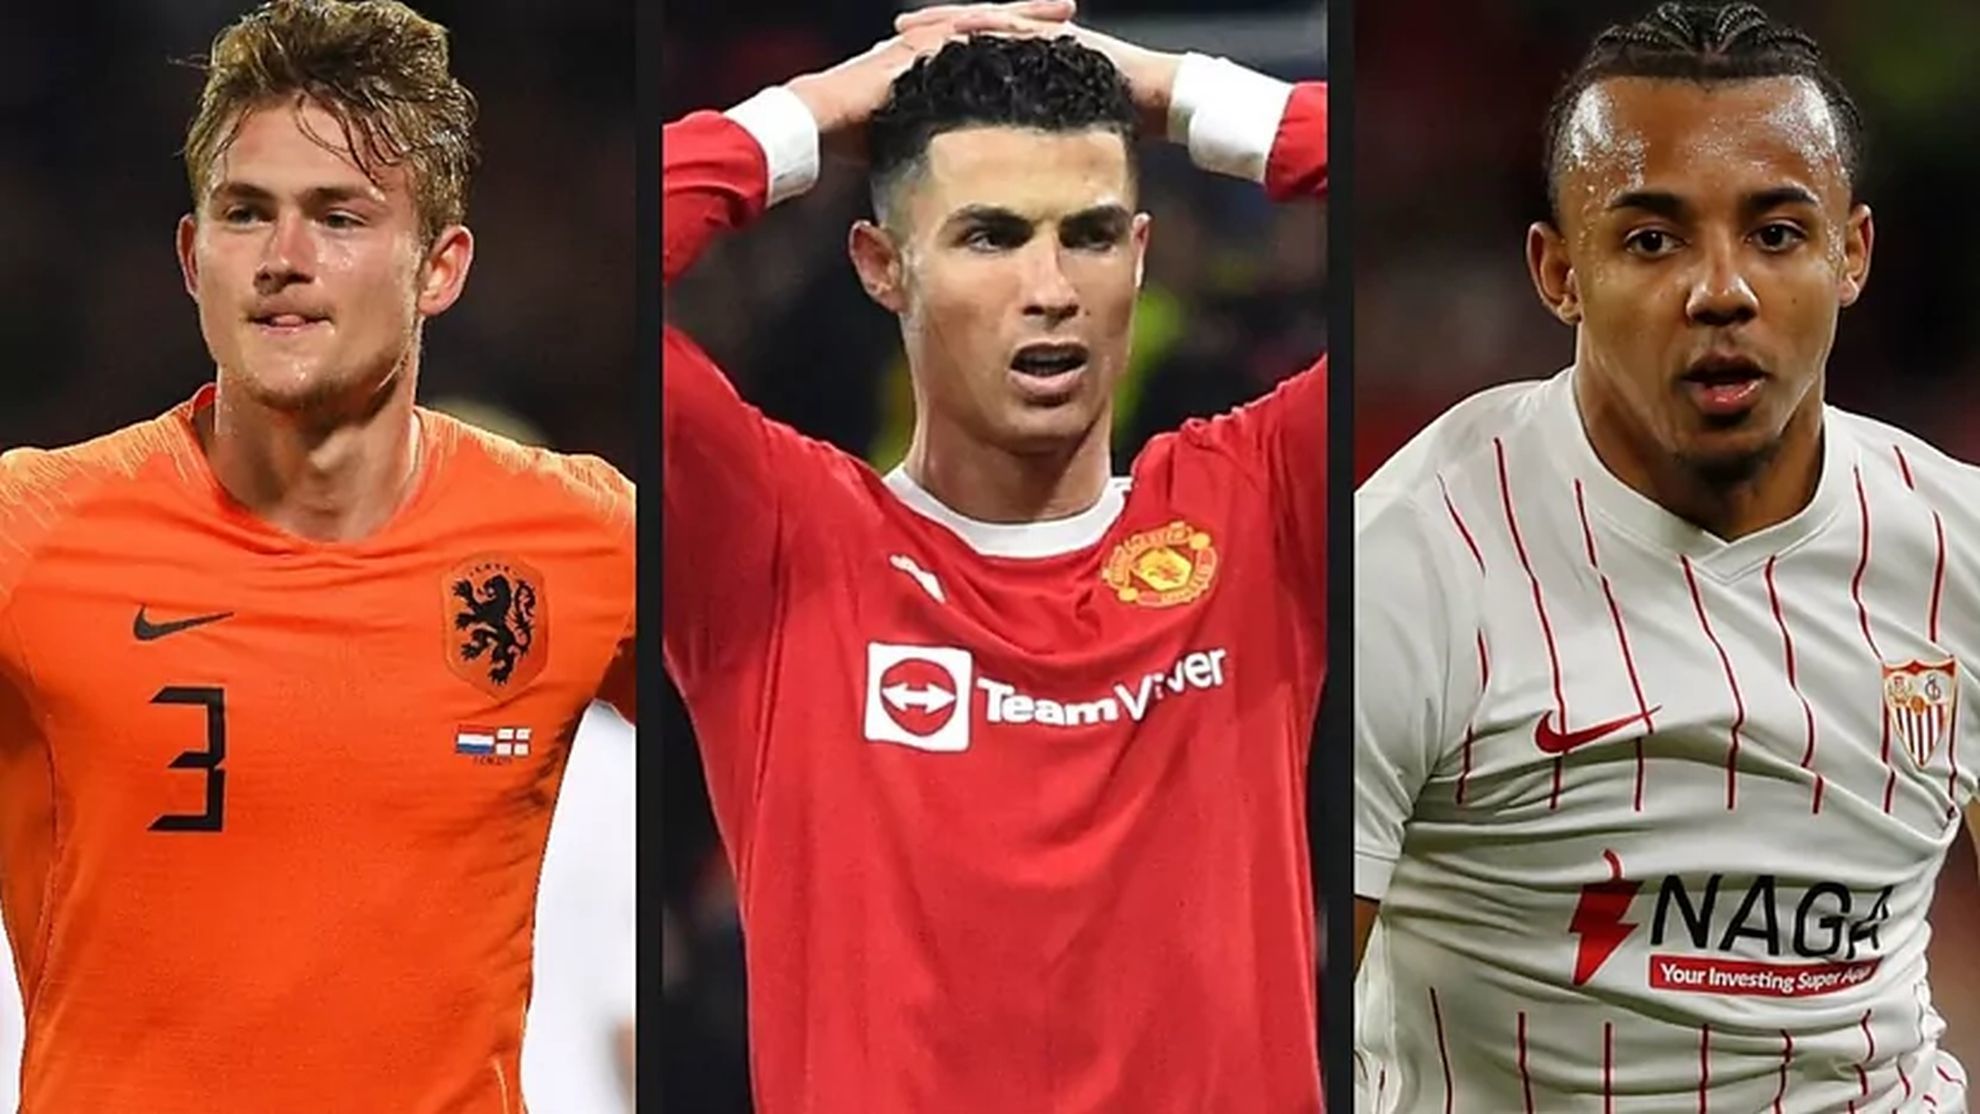 Transfer News LIVE, July 5: Bayern move for De Ligt, Ronaldo and Neymar look for new teams...